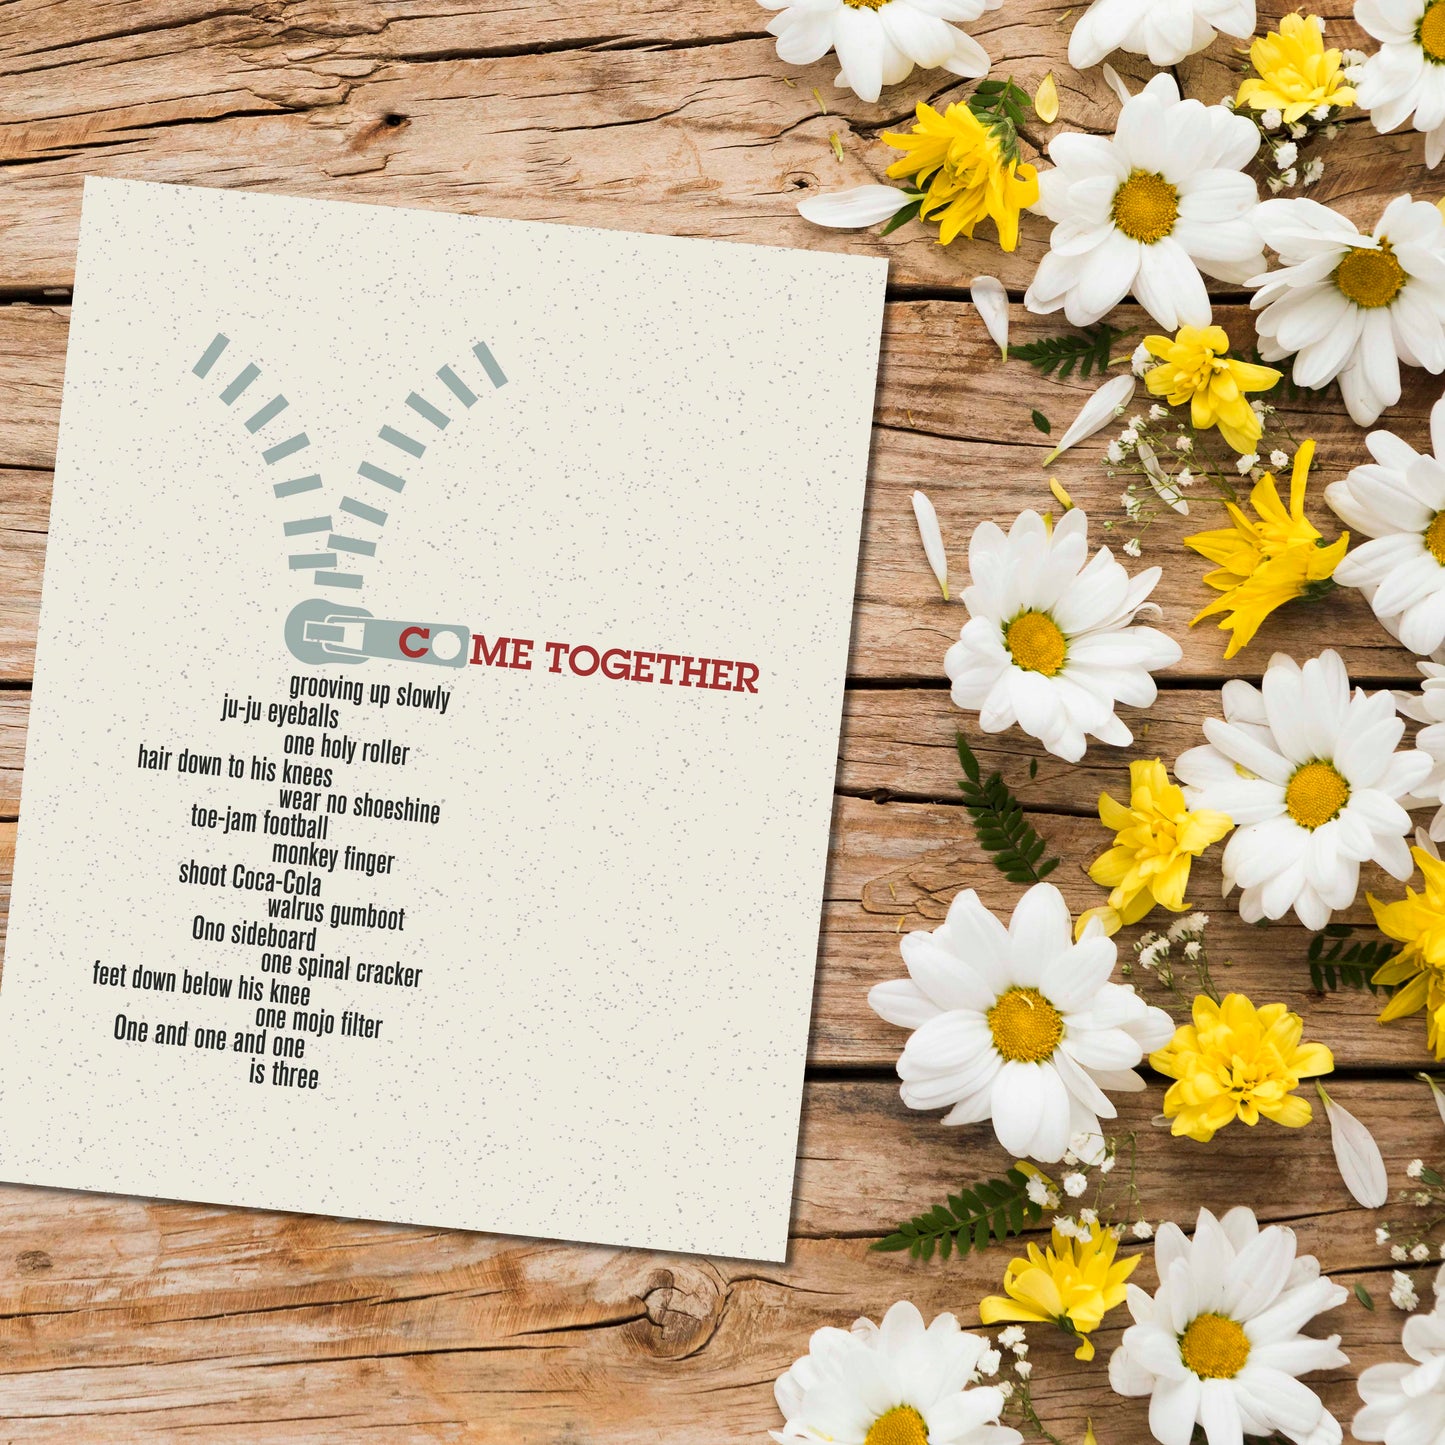 Come Together by the Beatles - Song Lyric Art Wall Print Song Lyrics Art Song Lyrics Art 8x10 Unframed Print 